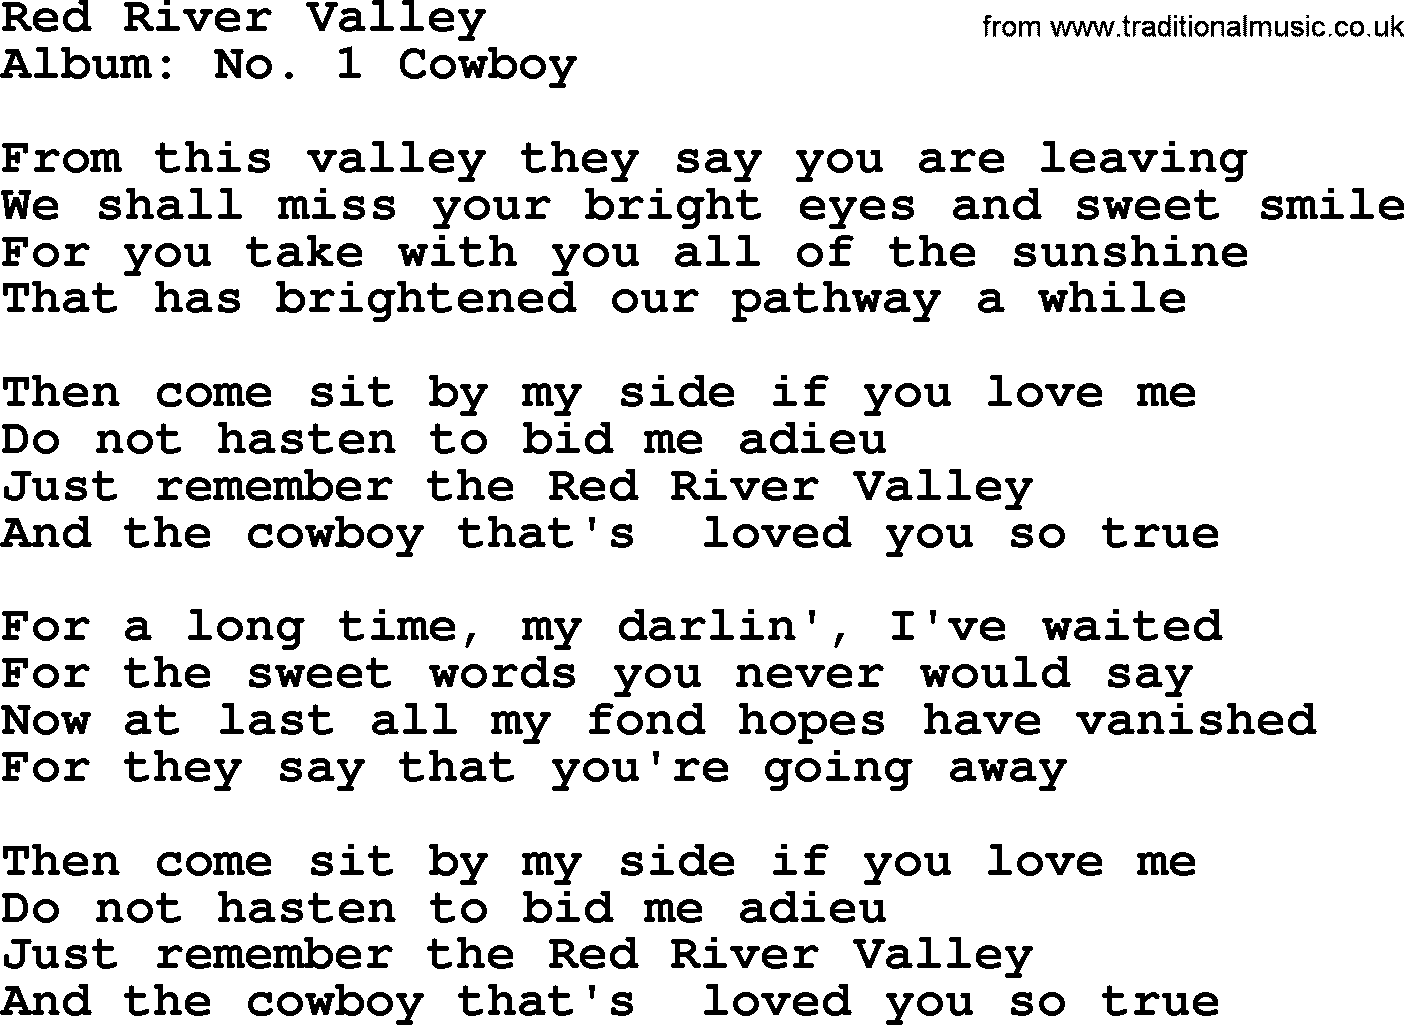 Marty Robbins song: Red River Valley, lyrics